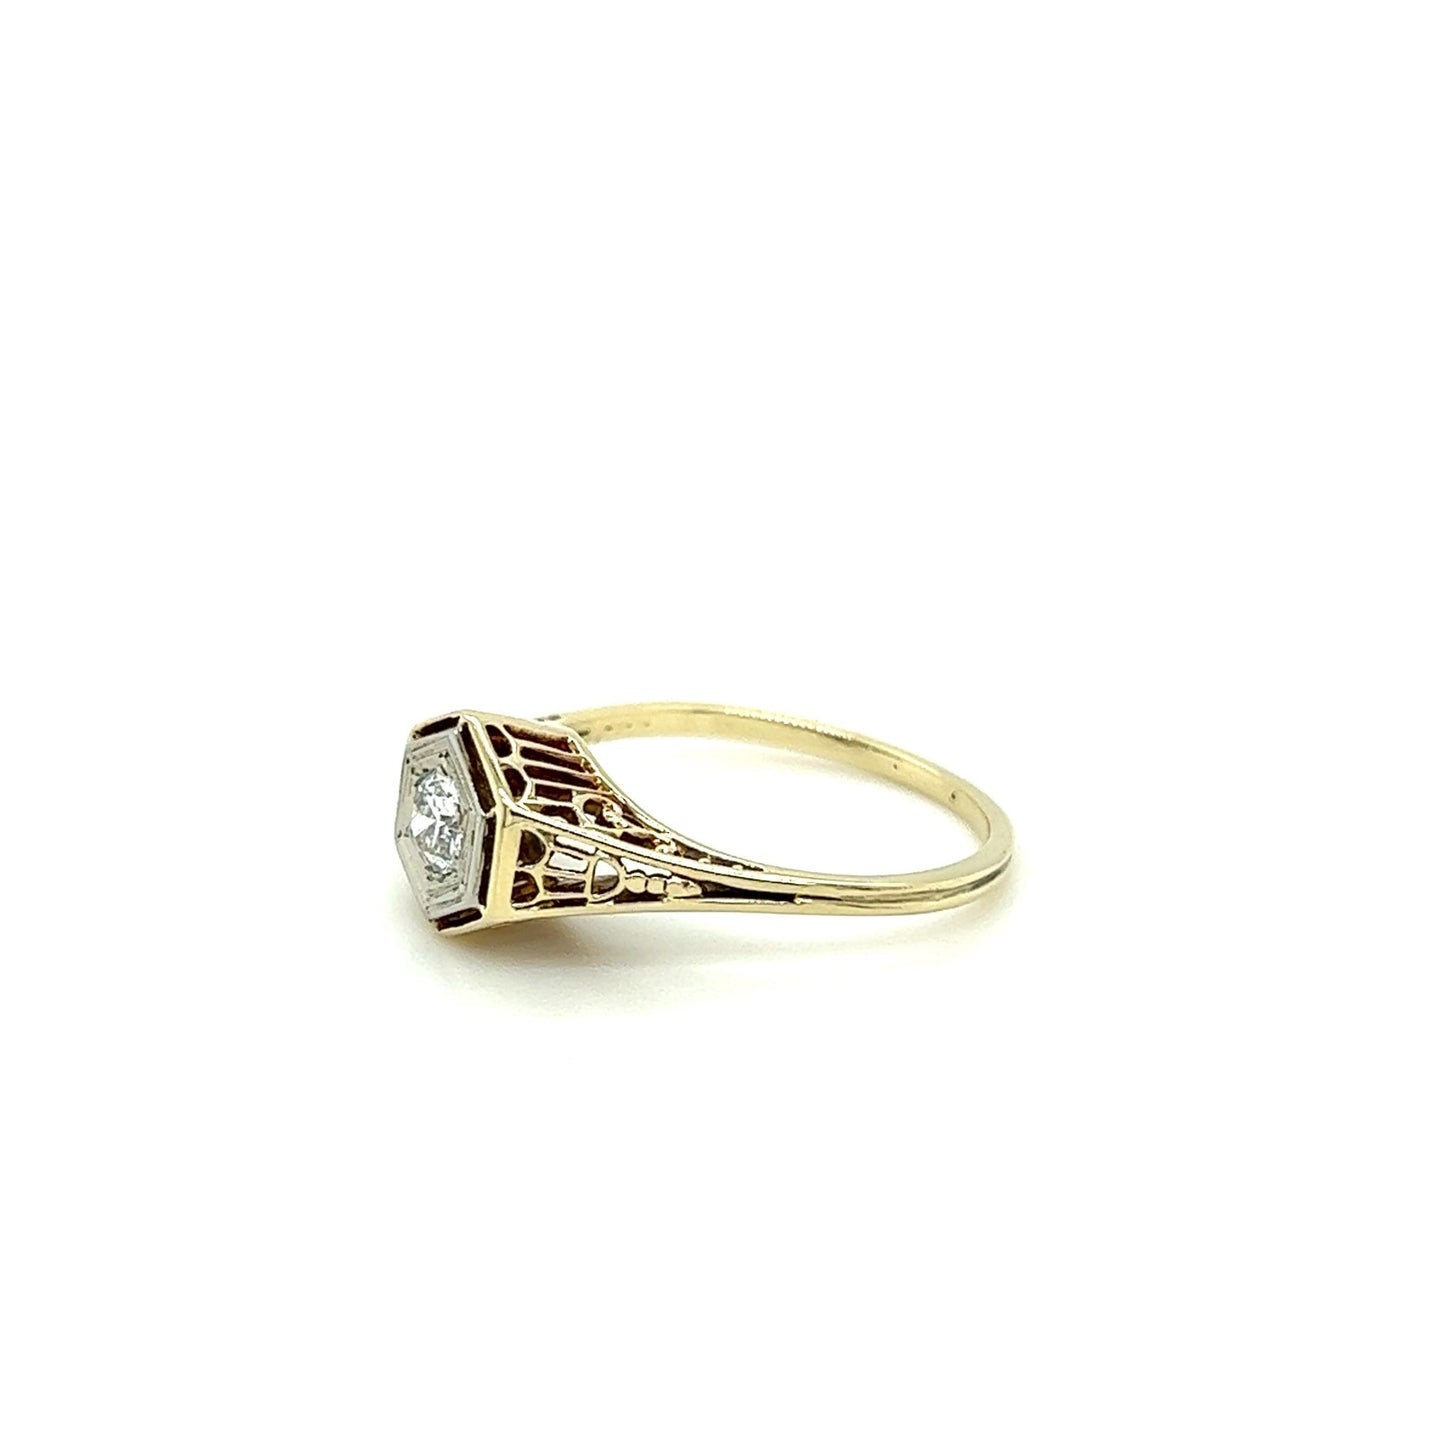 14kt Yellow Gold Two Tone Solitaire Diamond Filagree Ring